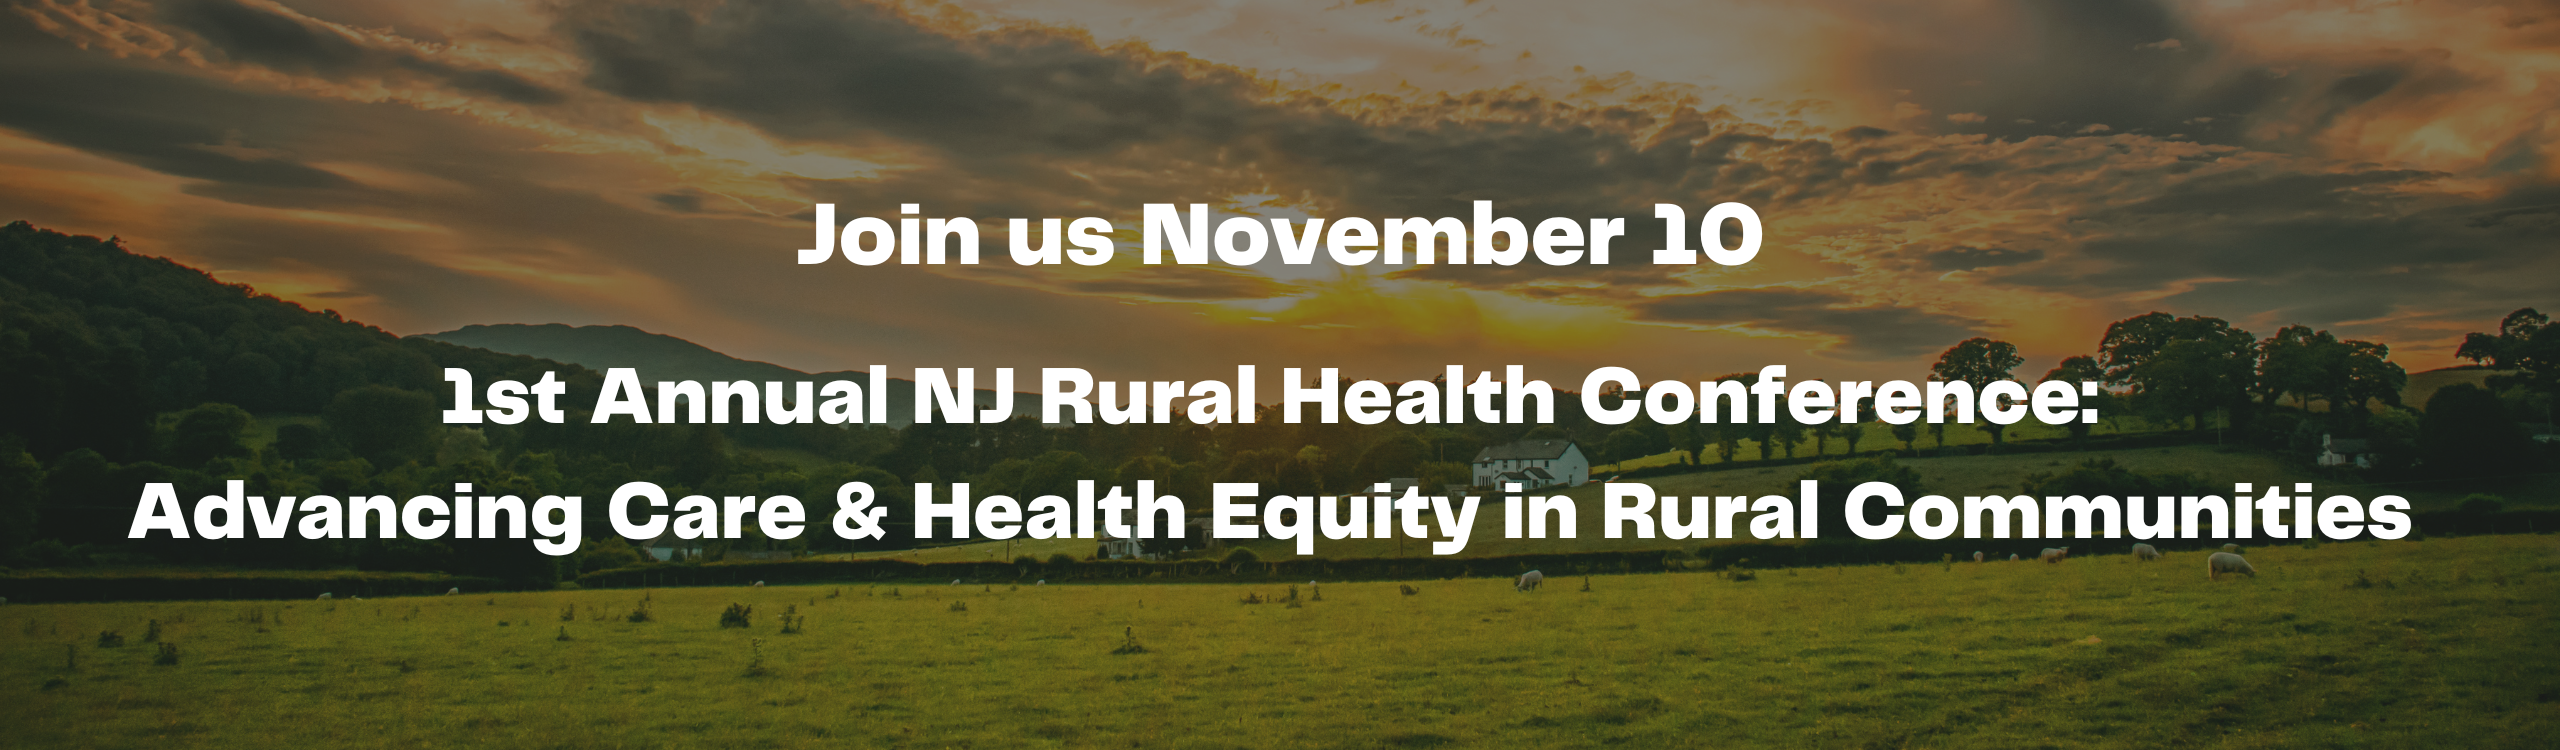 Rural Health Conference